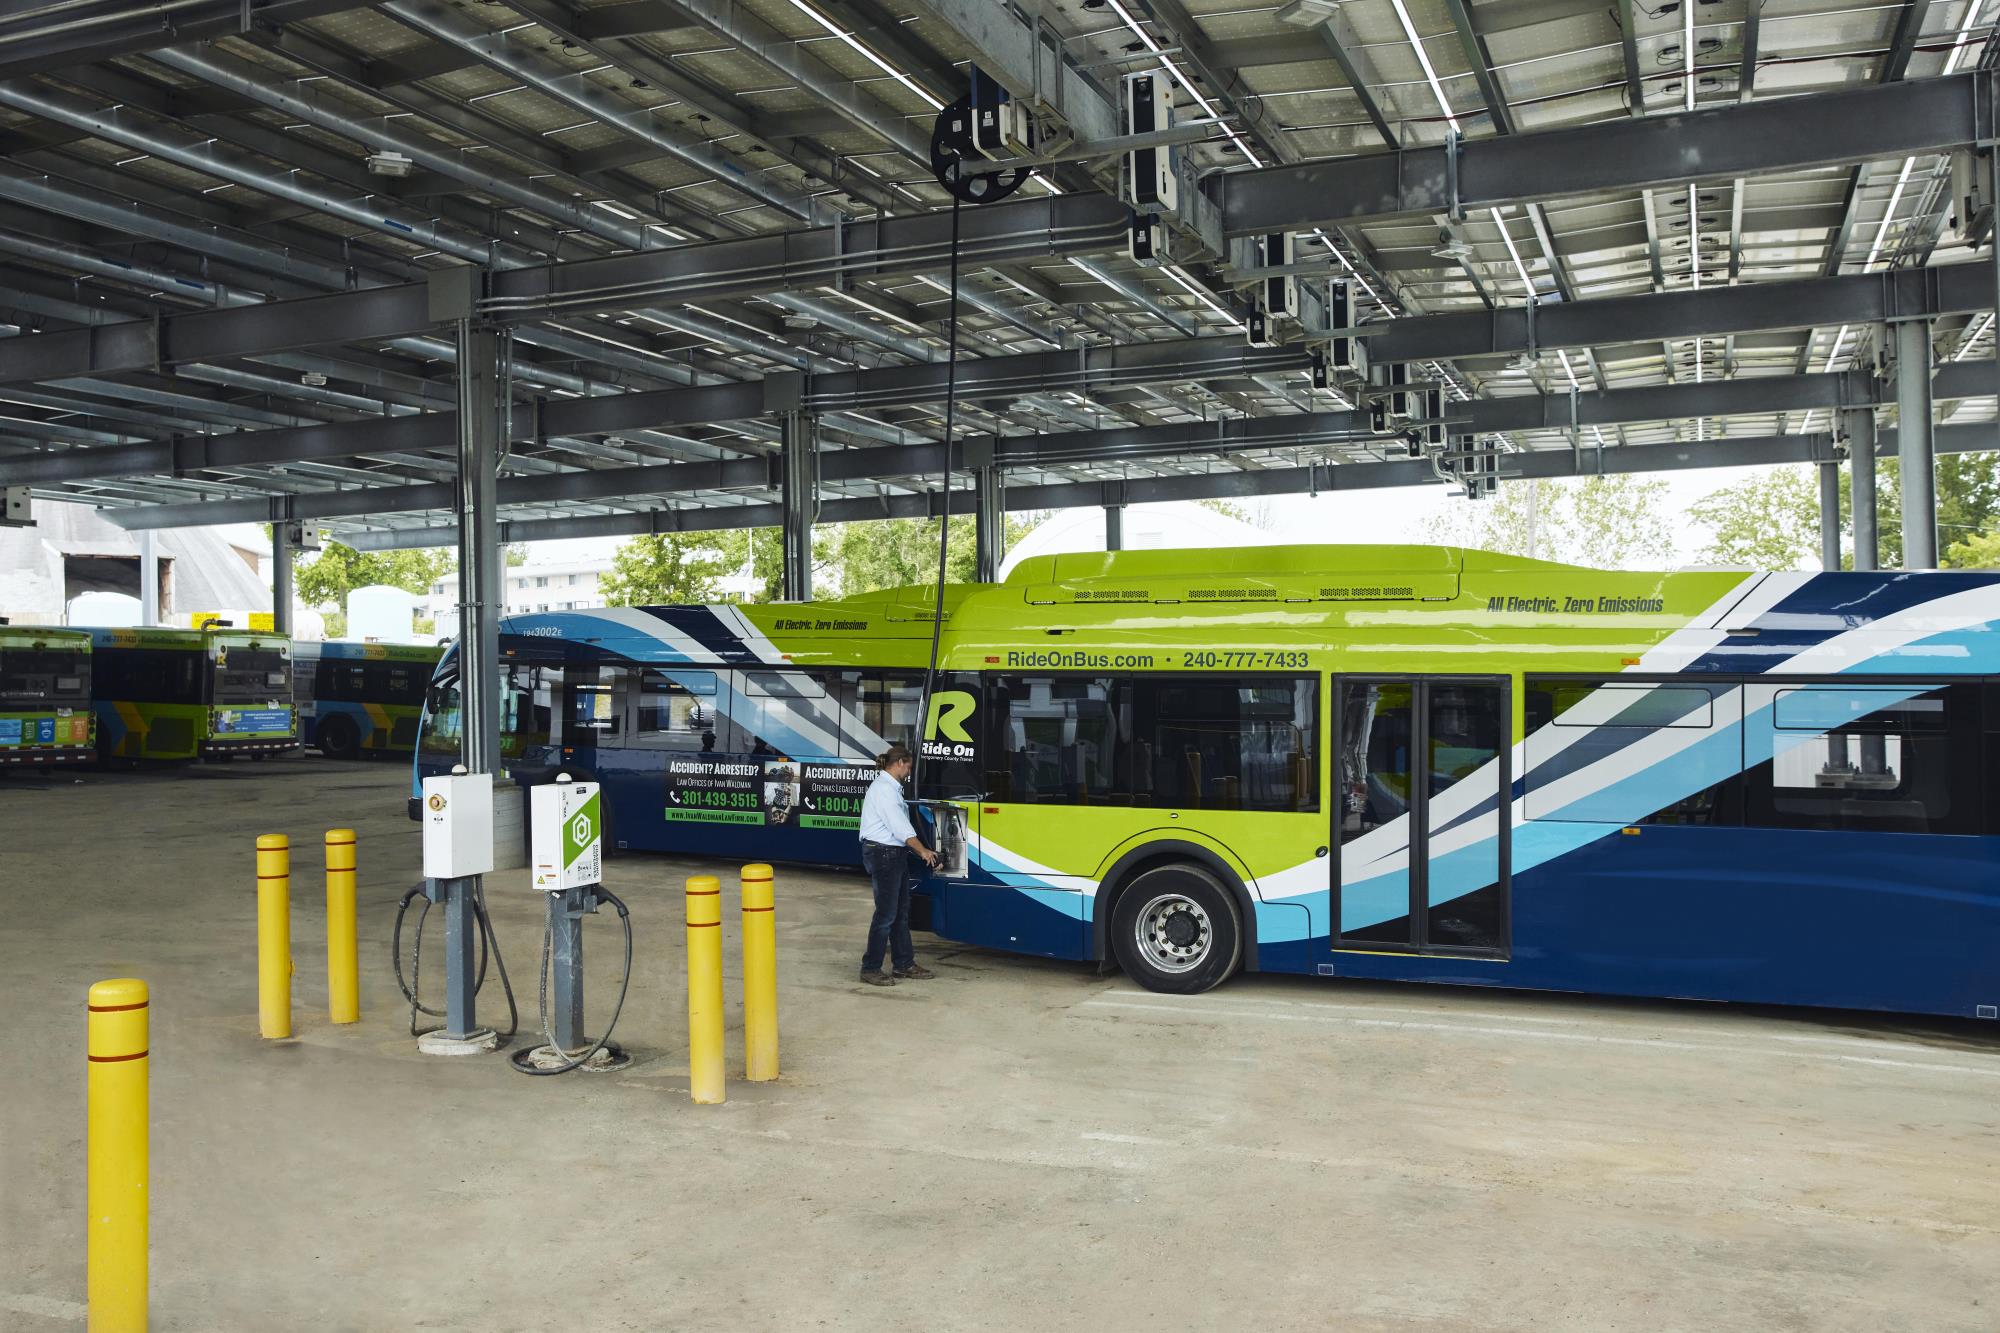 A covered bus depot with electric bus chargers and green and blue EV busses